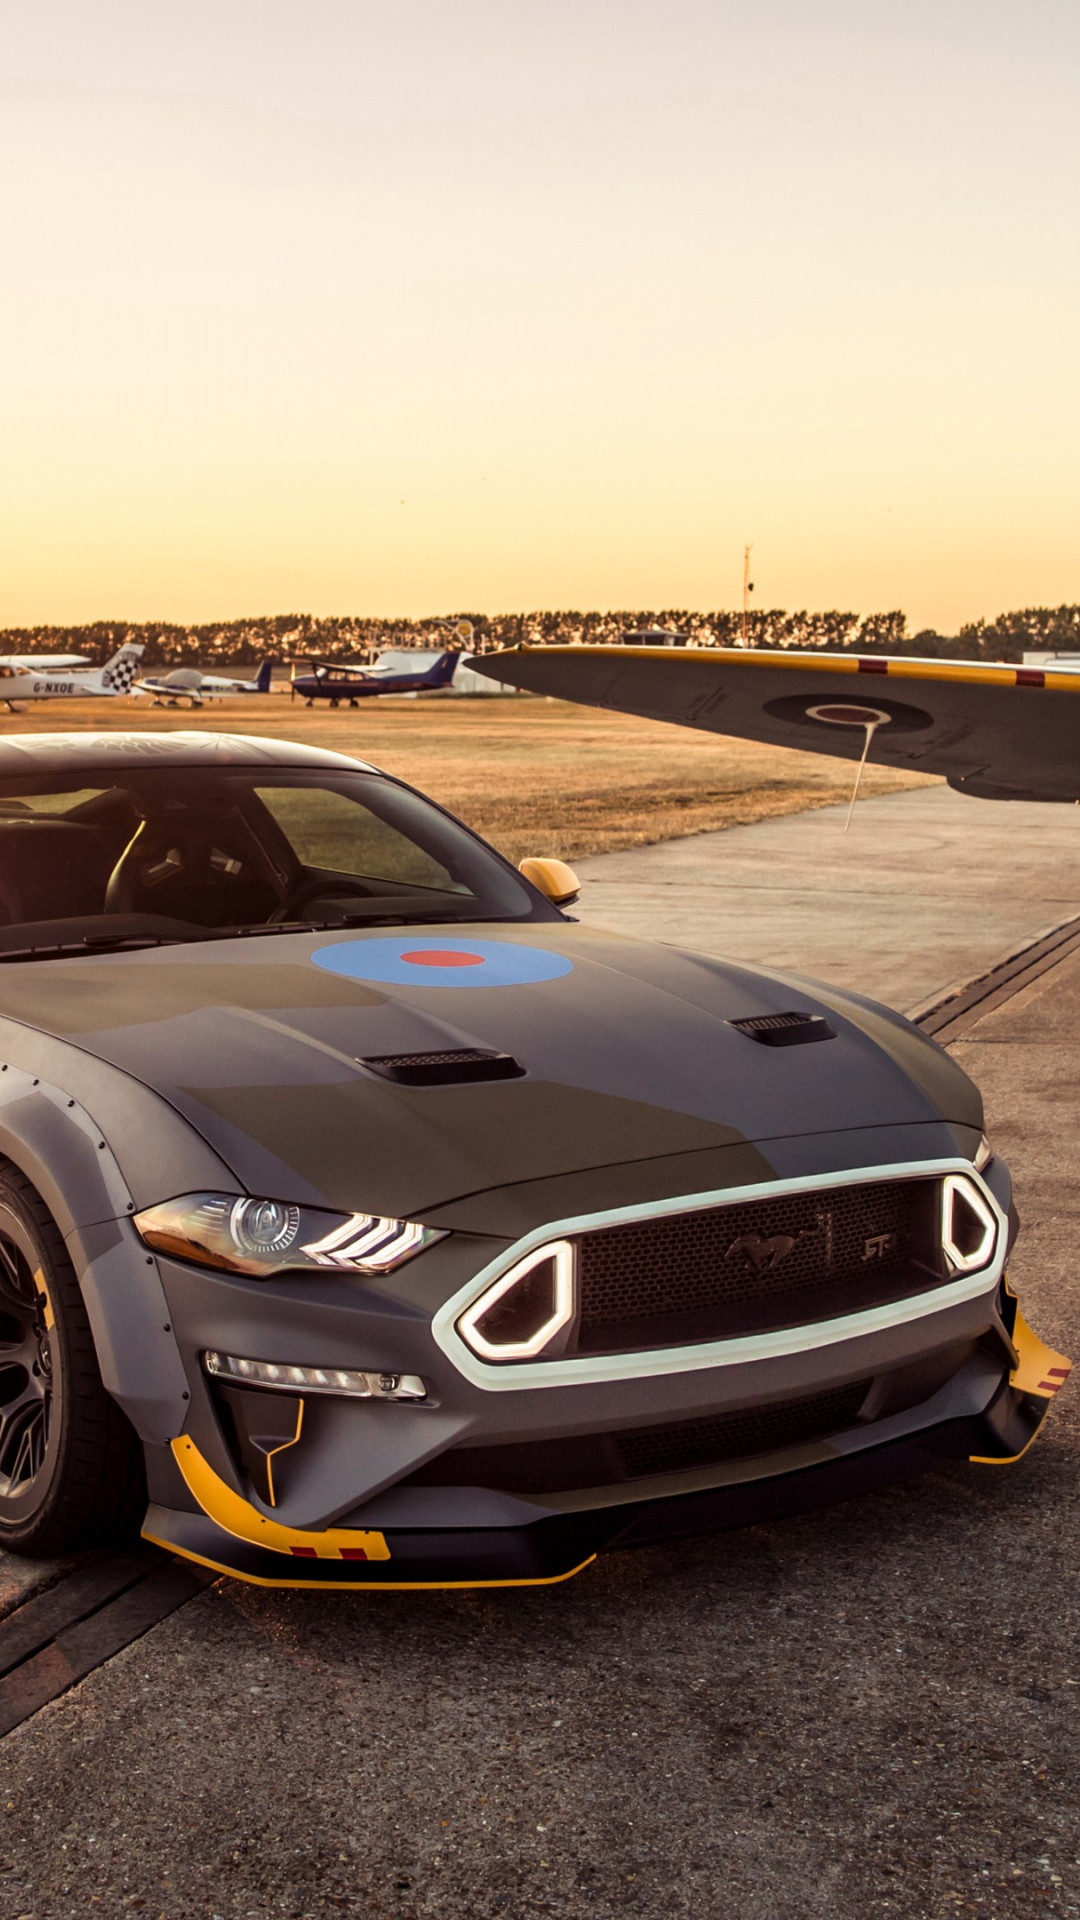 Ford Eagle Squadron Mustang GT wallpaper 1080x1920